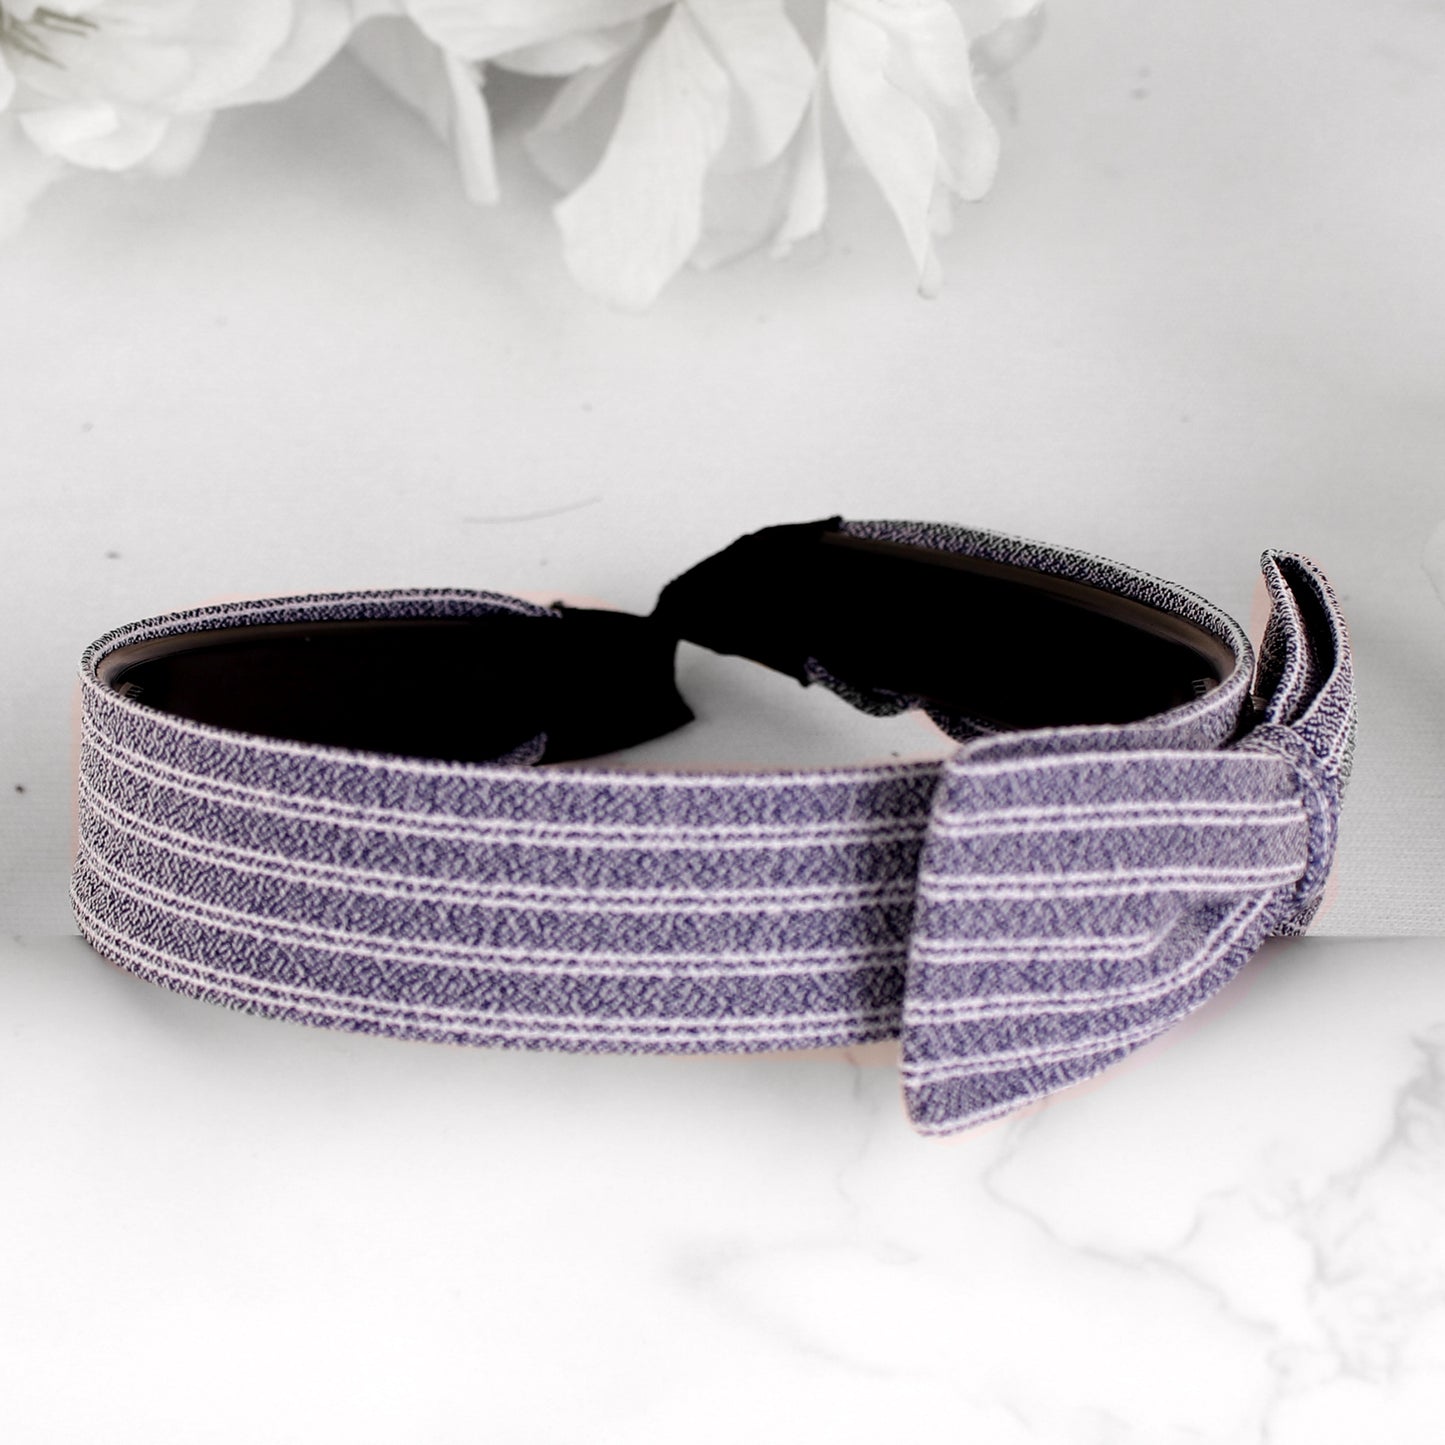 HairBand,Bewitching Bow Hair Band in Blue - Cippele Multi Store